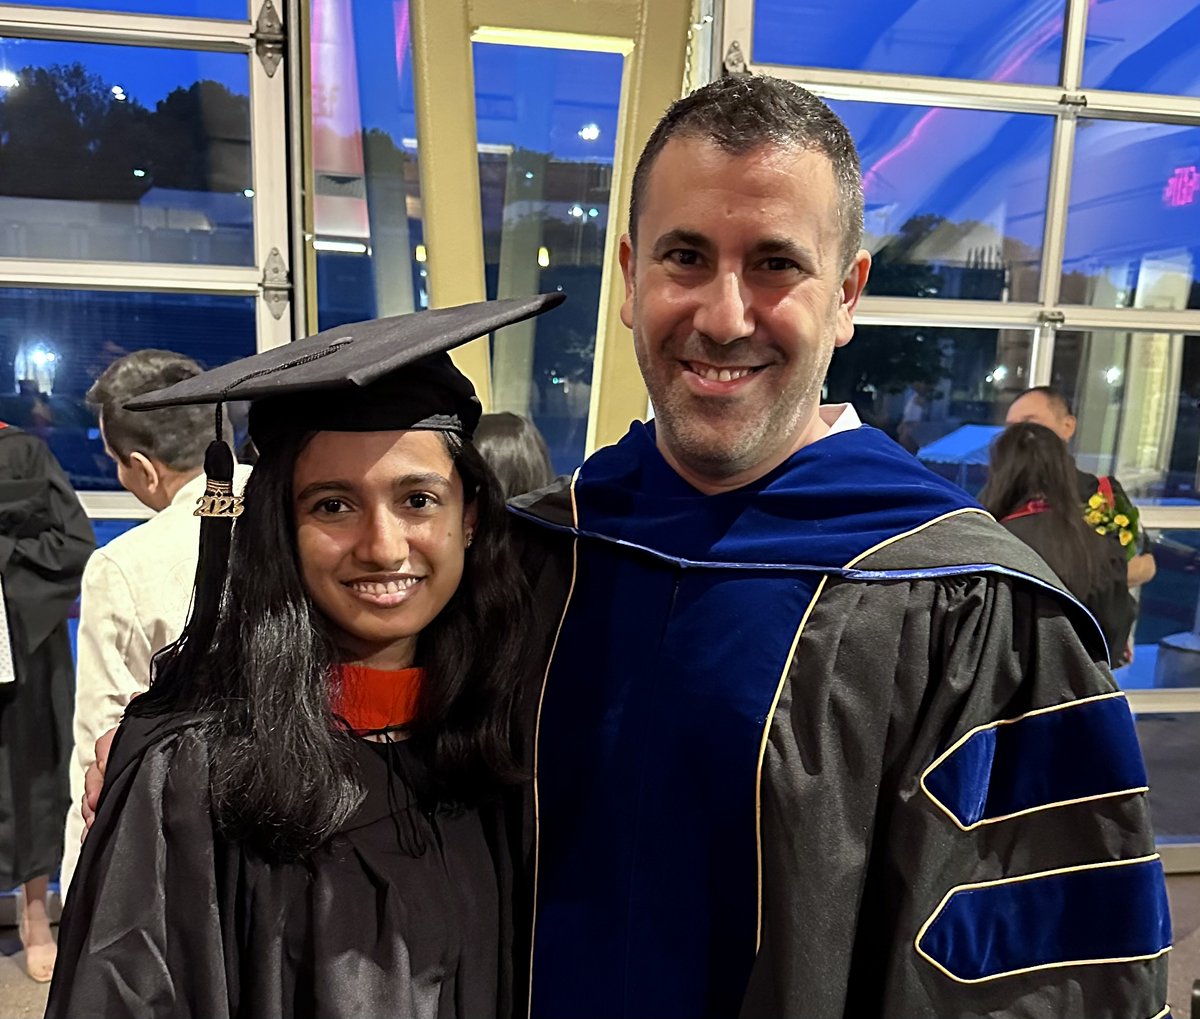 Grad highlight - Ms. Mrithula Sridhar Kuma graduated in May 2023 w/ her Masters in Biomedical Engineering @cmu_bme and now works as a Research Associate @EikonTX, in the lab she investigated the role of shear stress on cell viability during #FRESH #3Dbioprinting